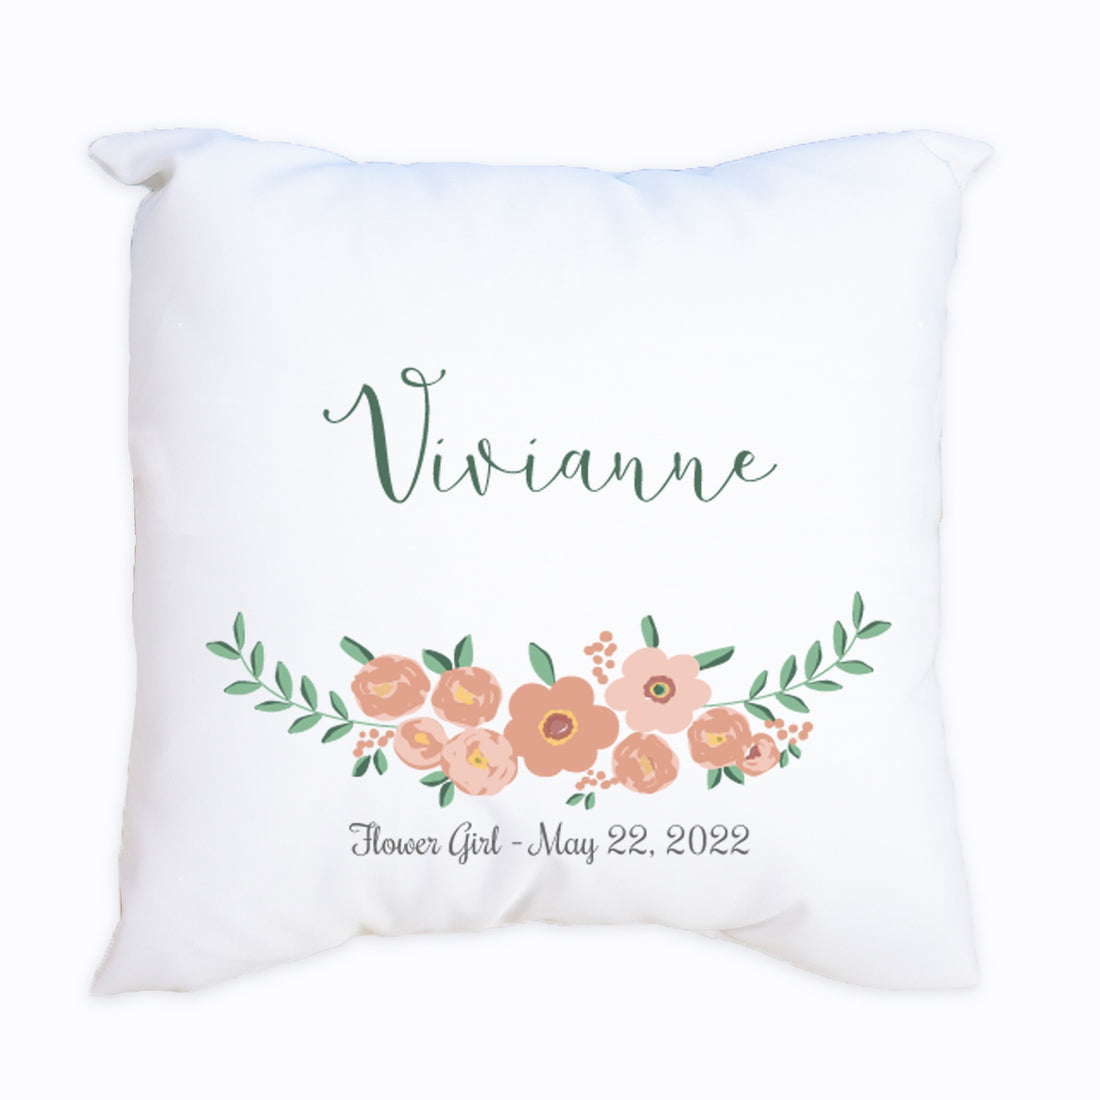 Personalized Throw Pillow - Blush Spring Floral